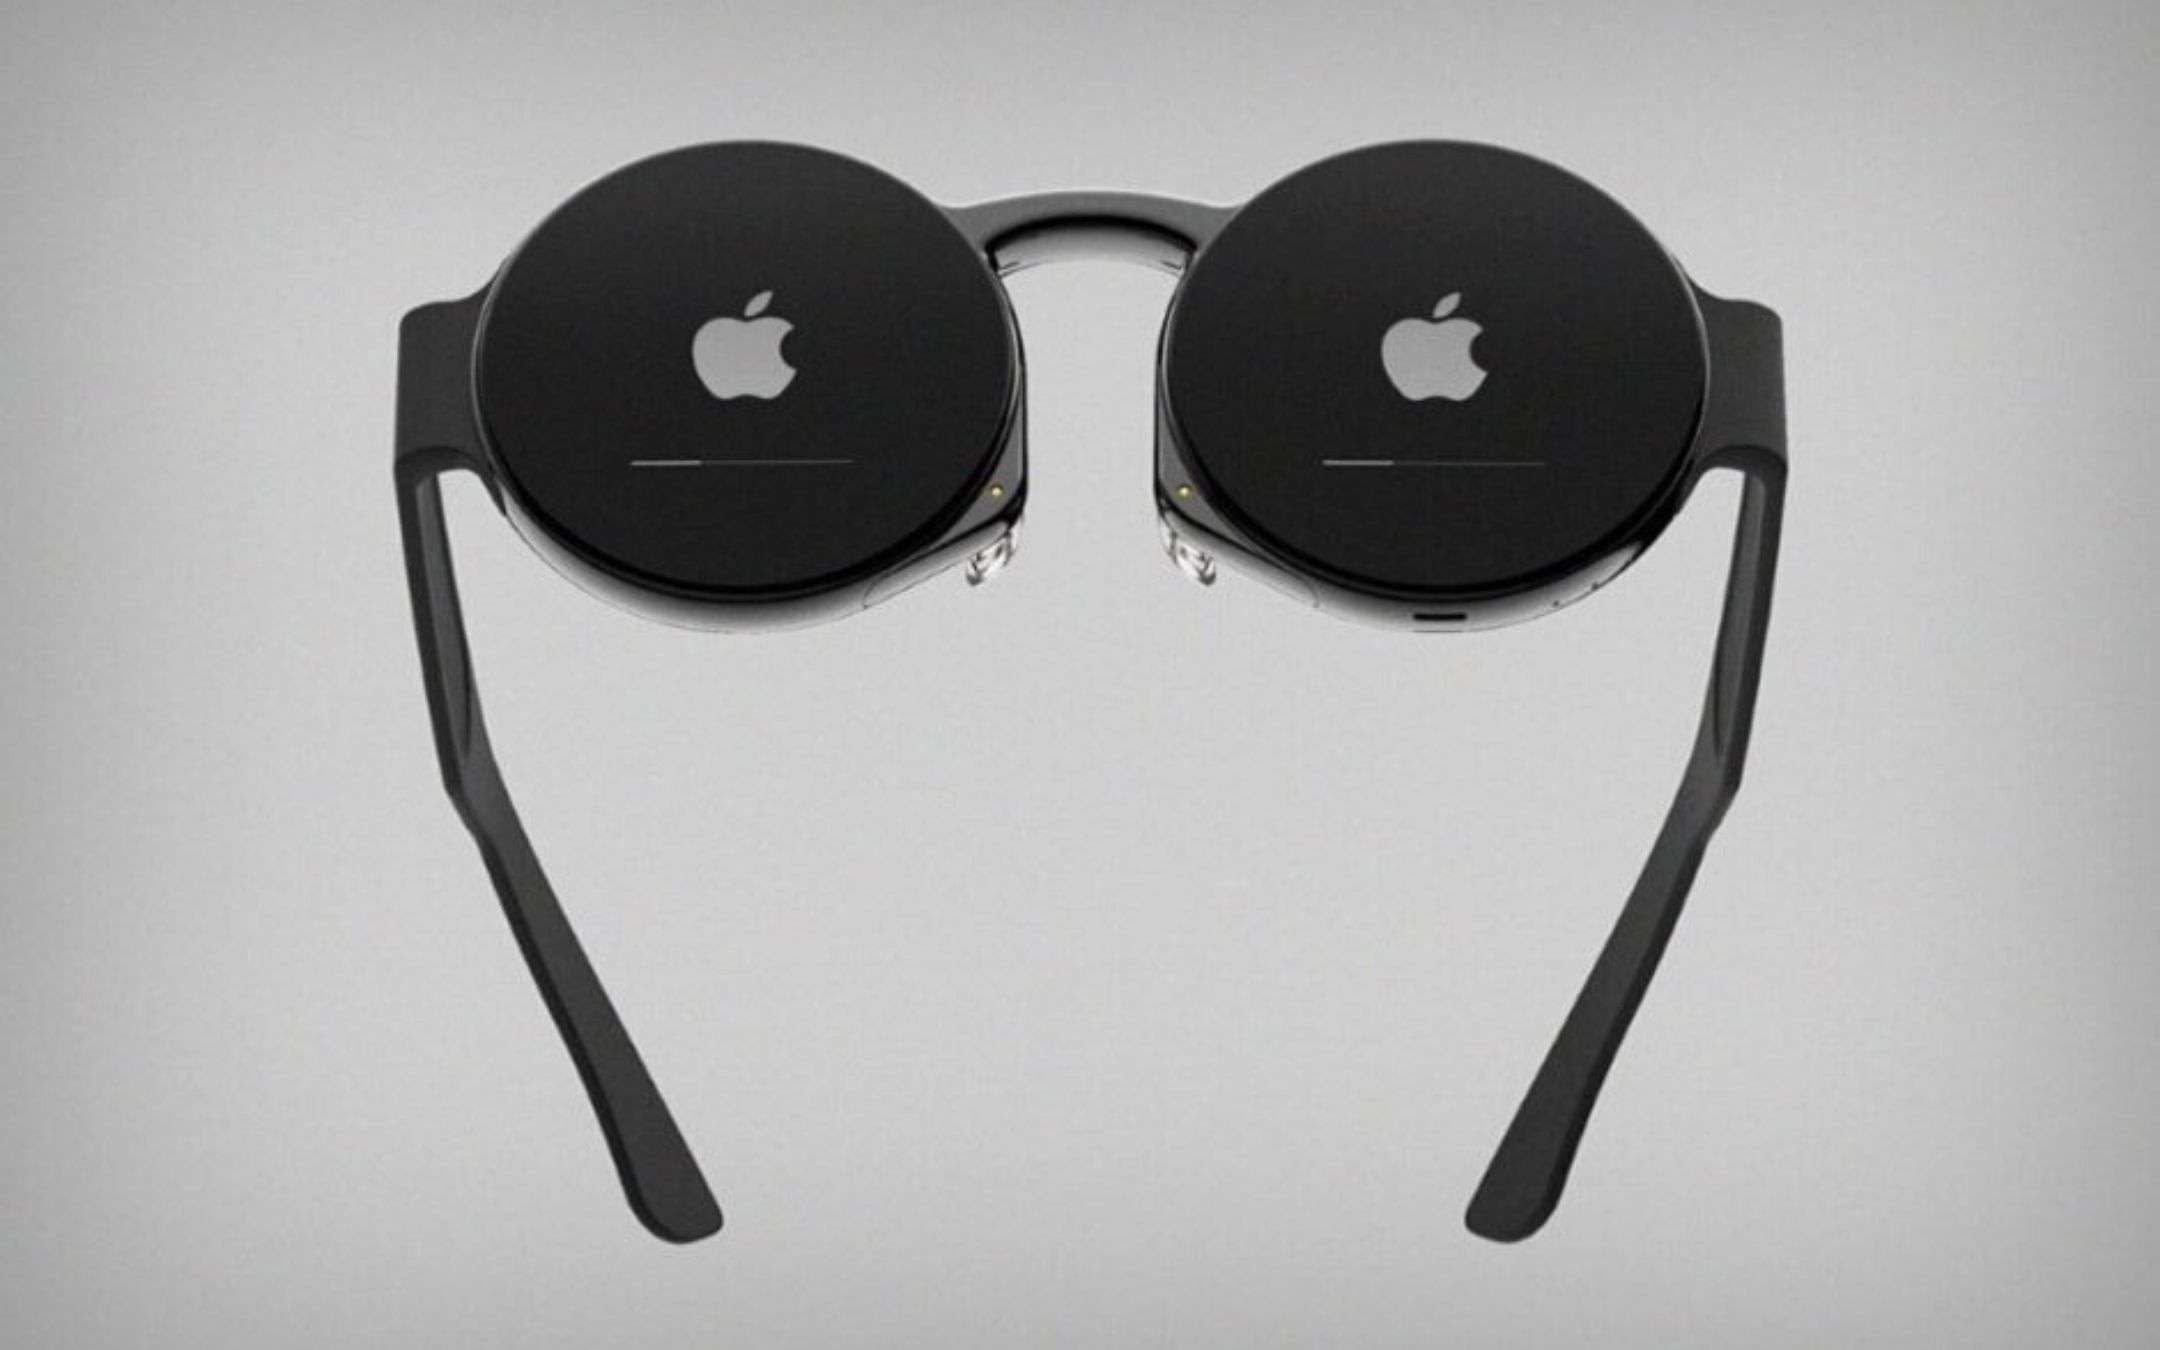 Apple AR headset: in test come HTC Vive?